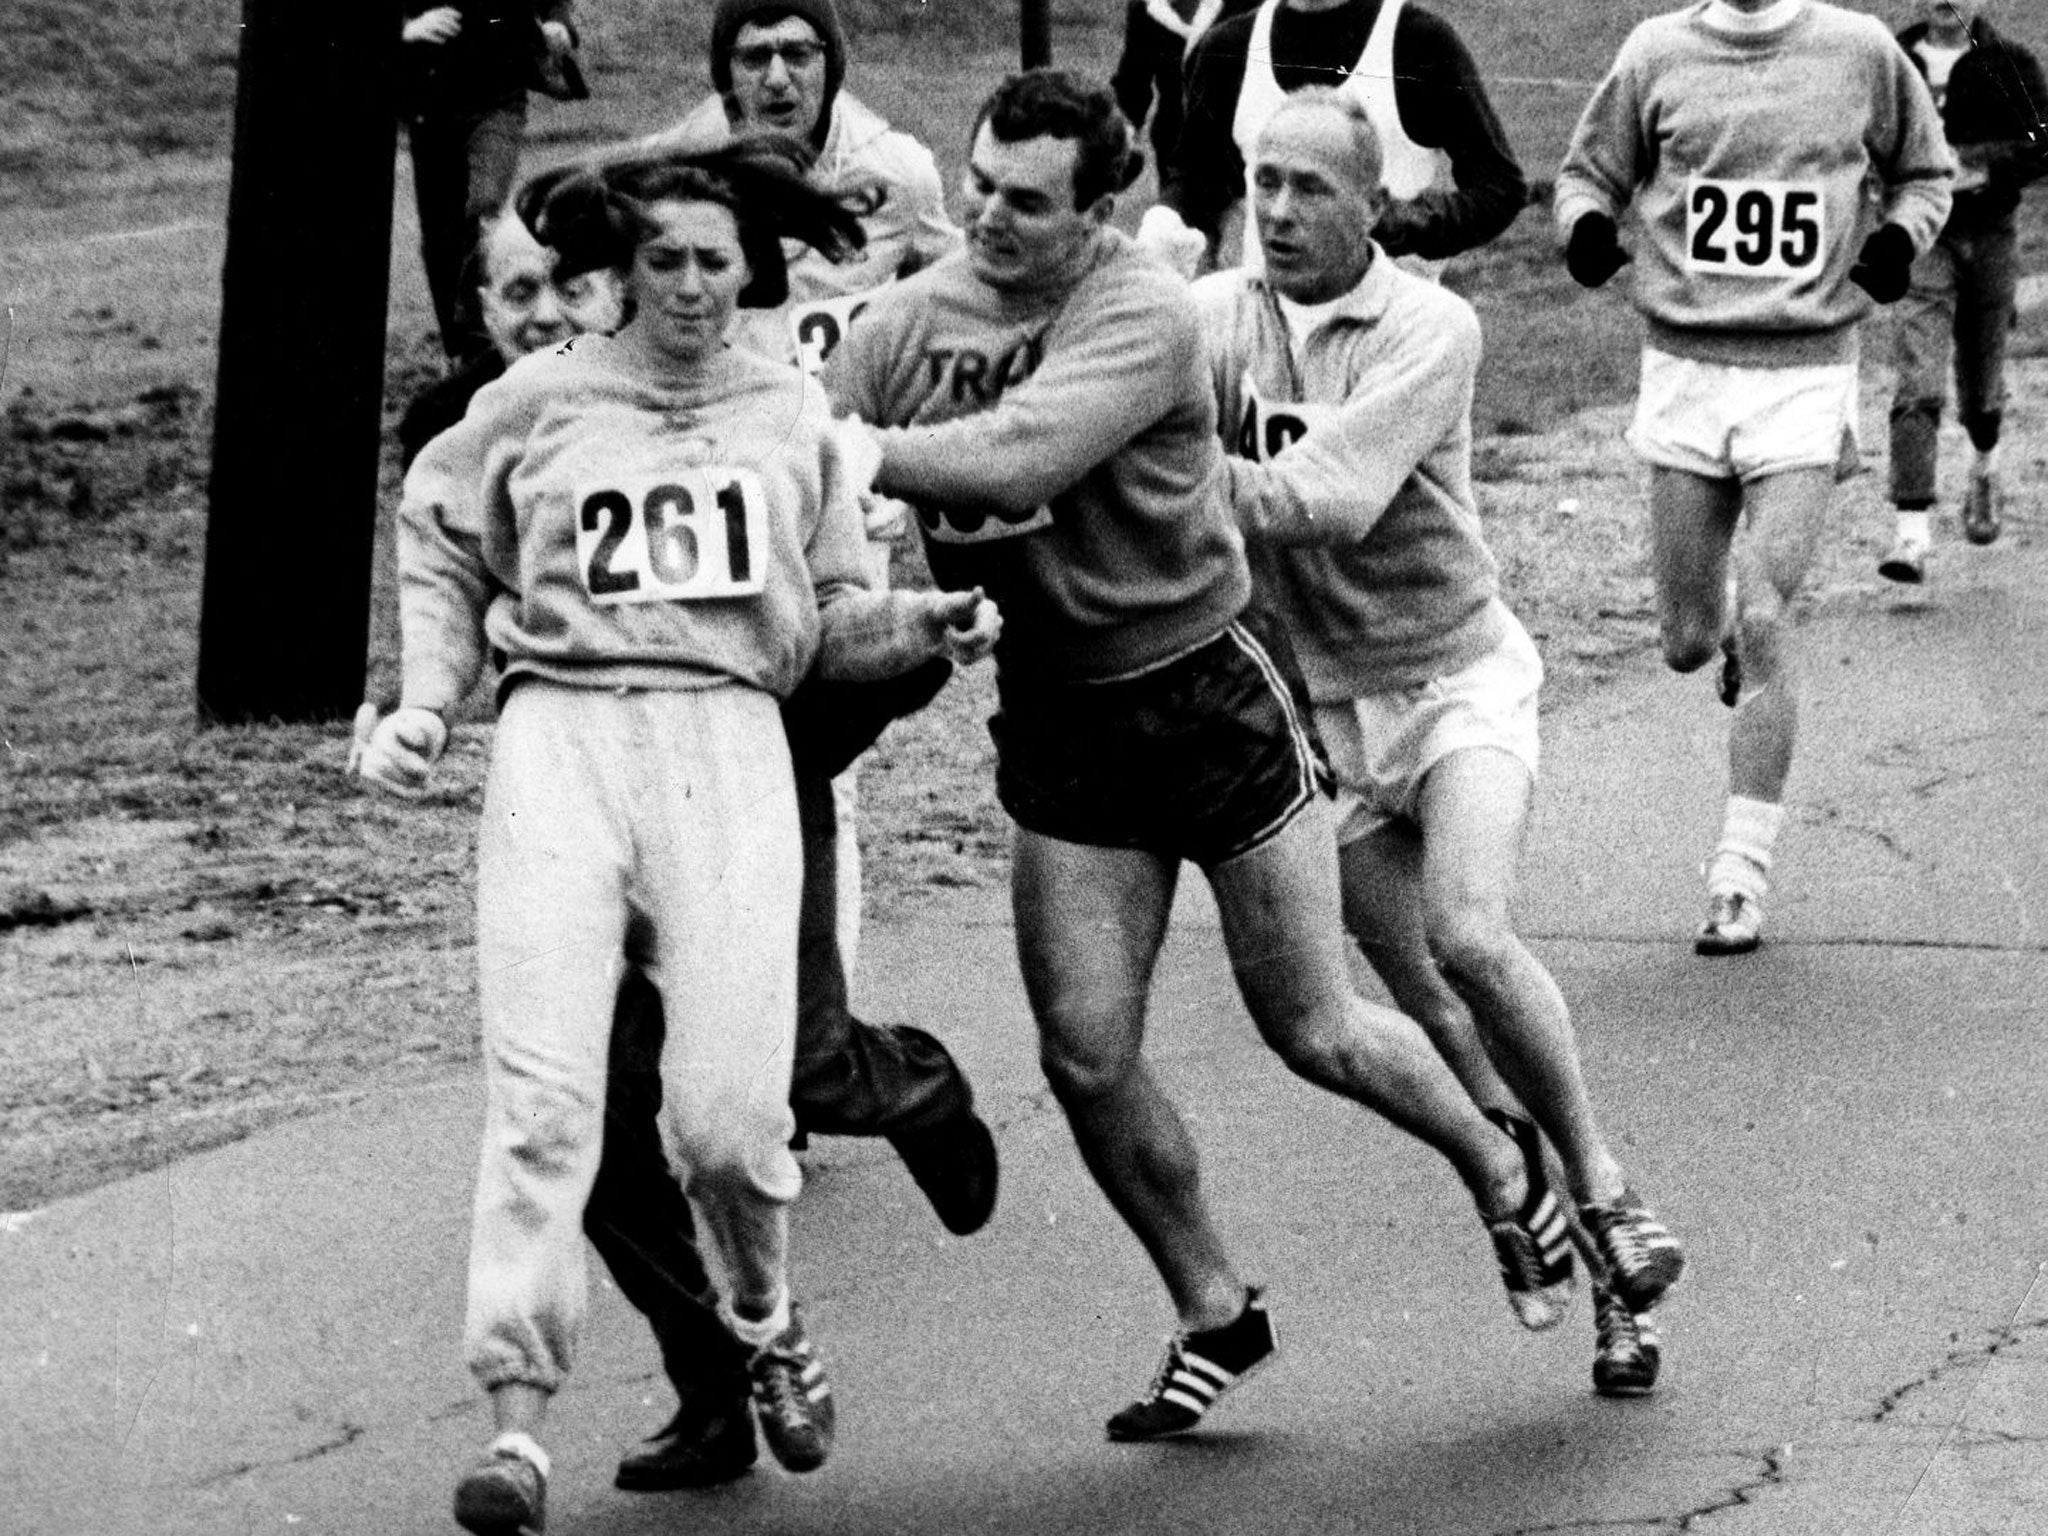 An official (left) tries to remove Kathy Switzer from the Boston Marathon in 1967